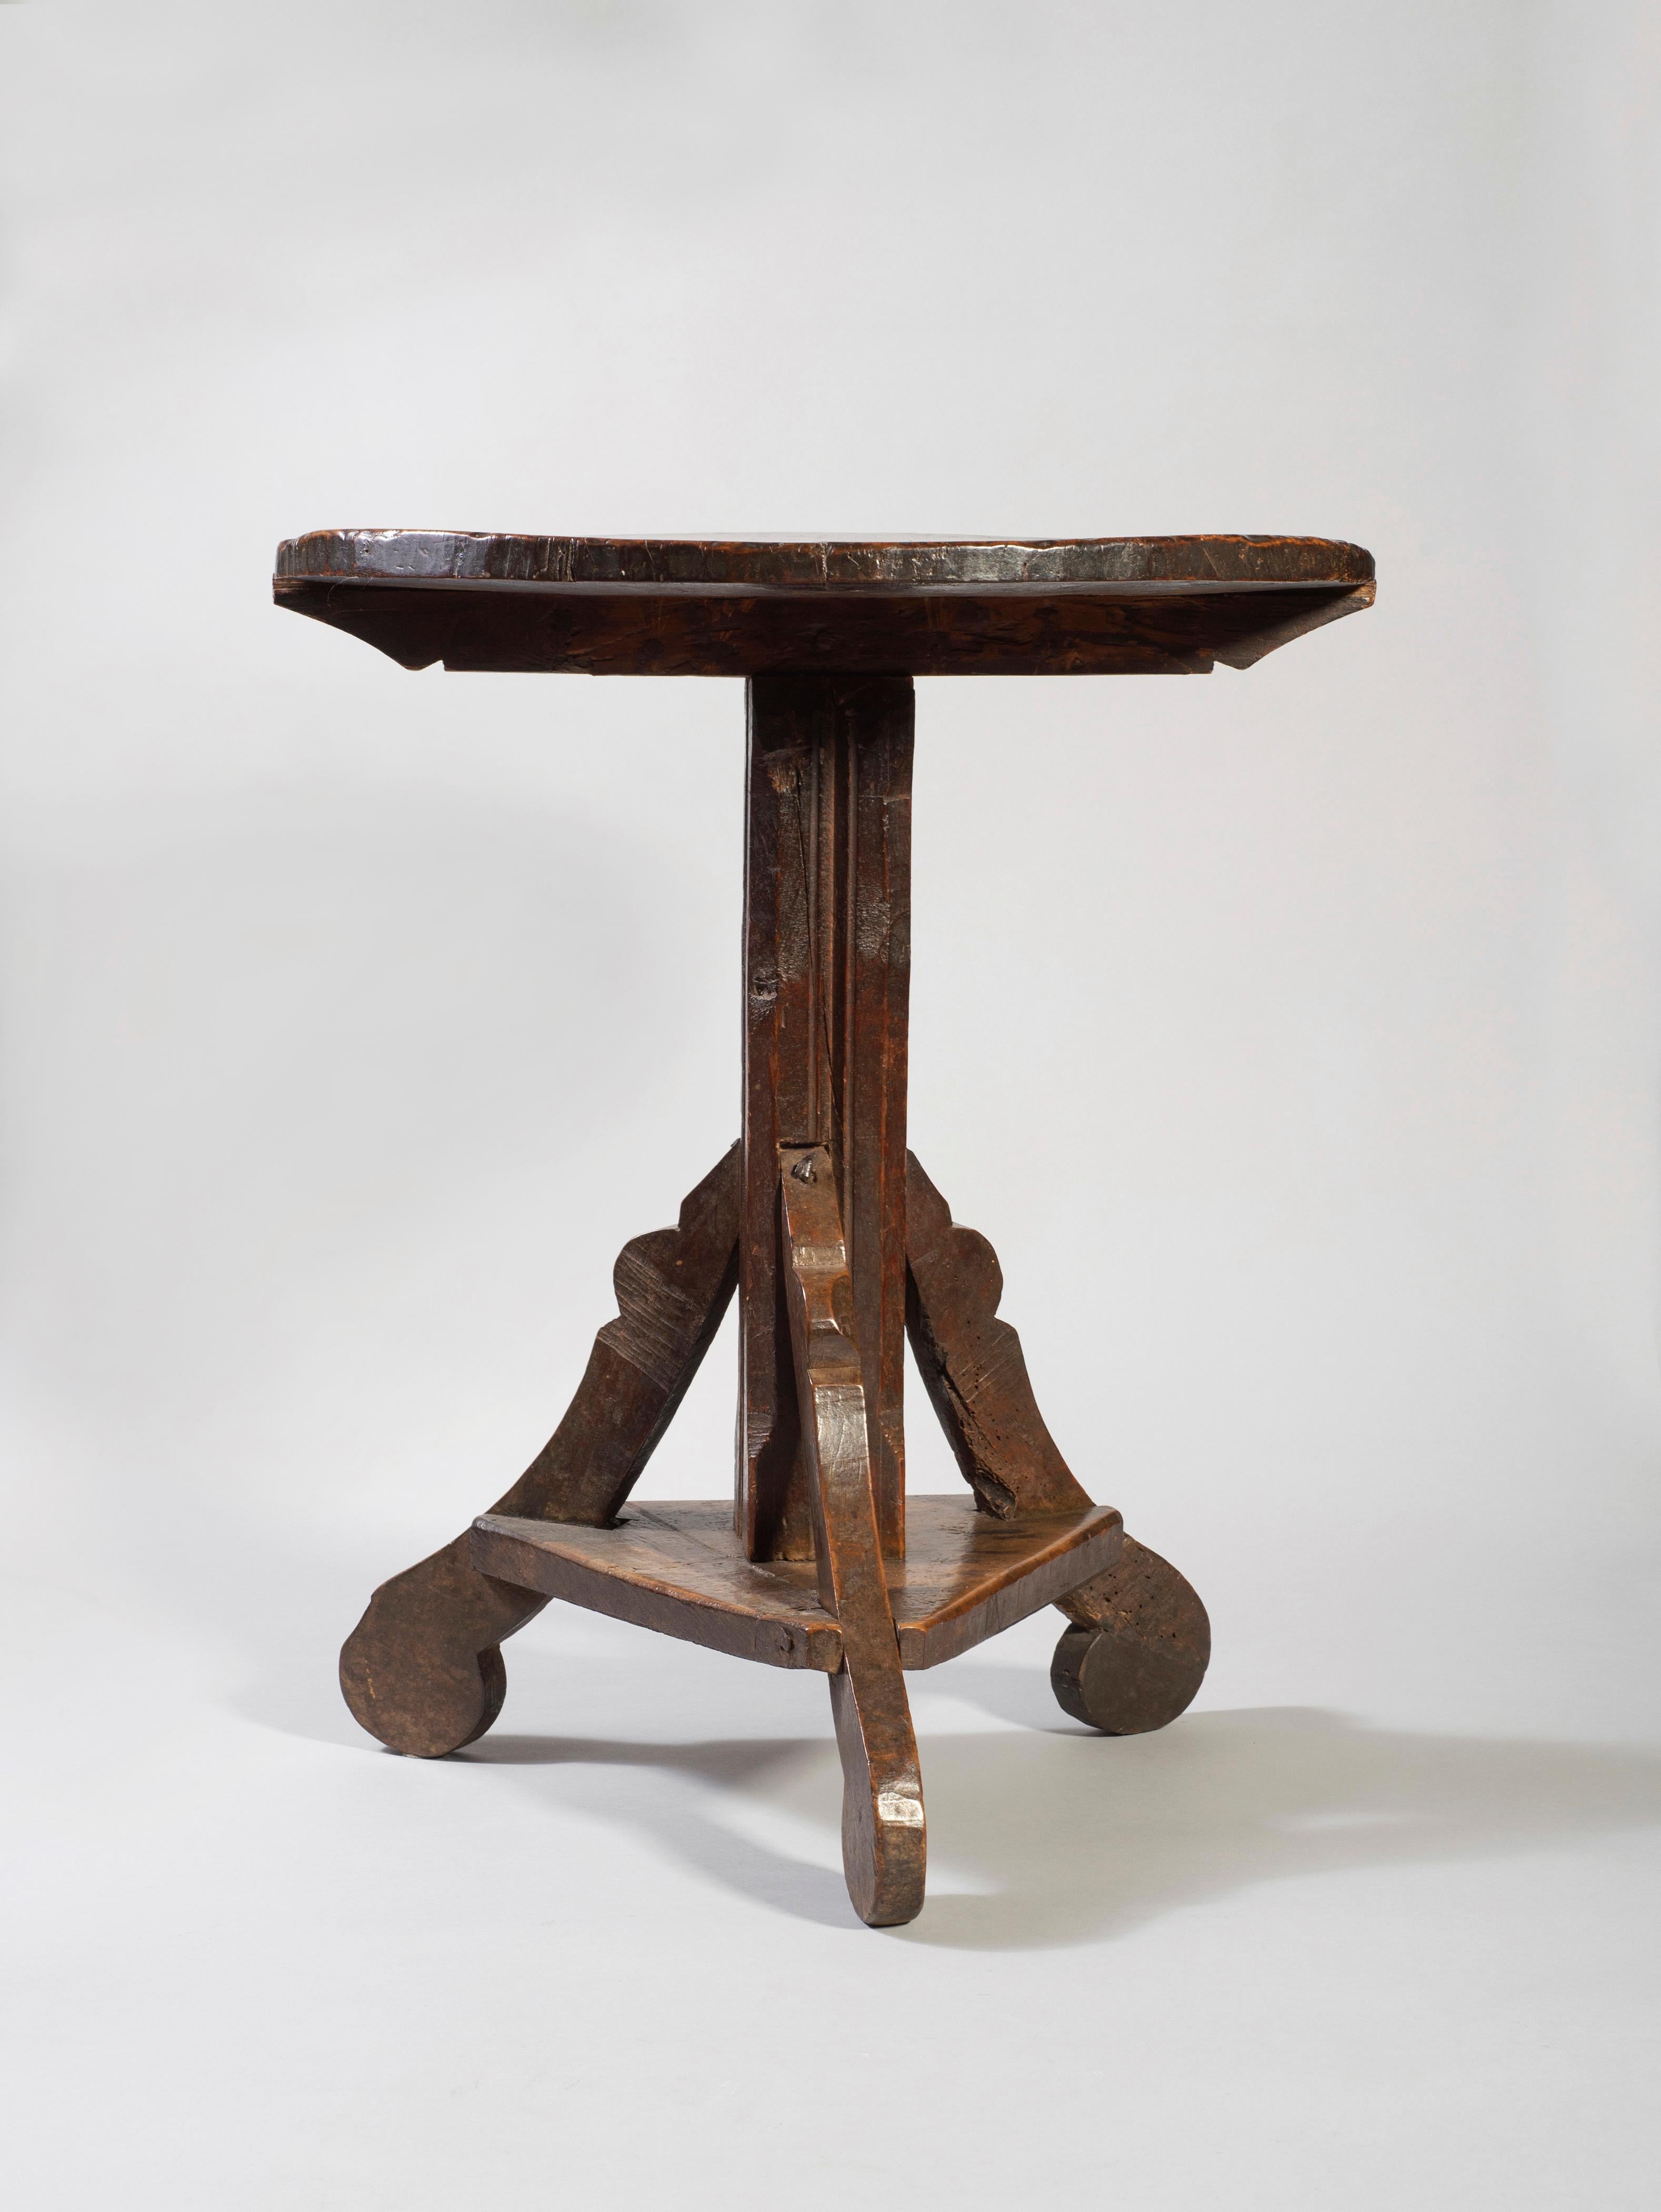 Round walnut table, Lombardy, 16th century

Resting on the ground by means of three feet slightly fretted and ending in a rounded shape.

They are inserted into a triangular base, suitable for holding them in place, and attached by nailing to the